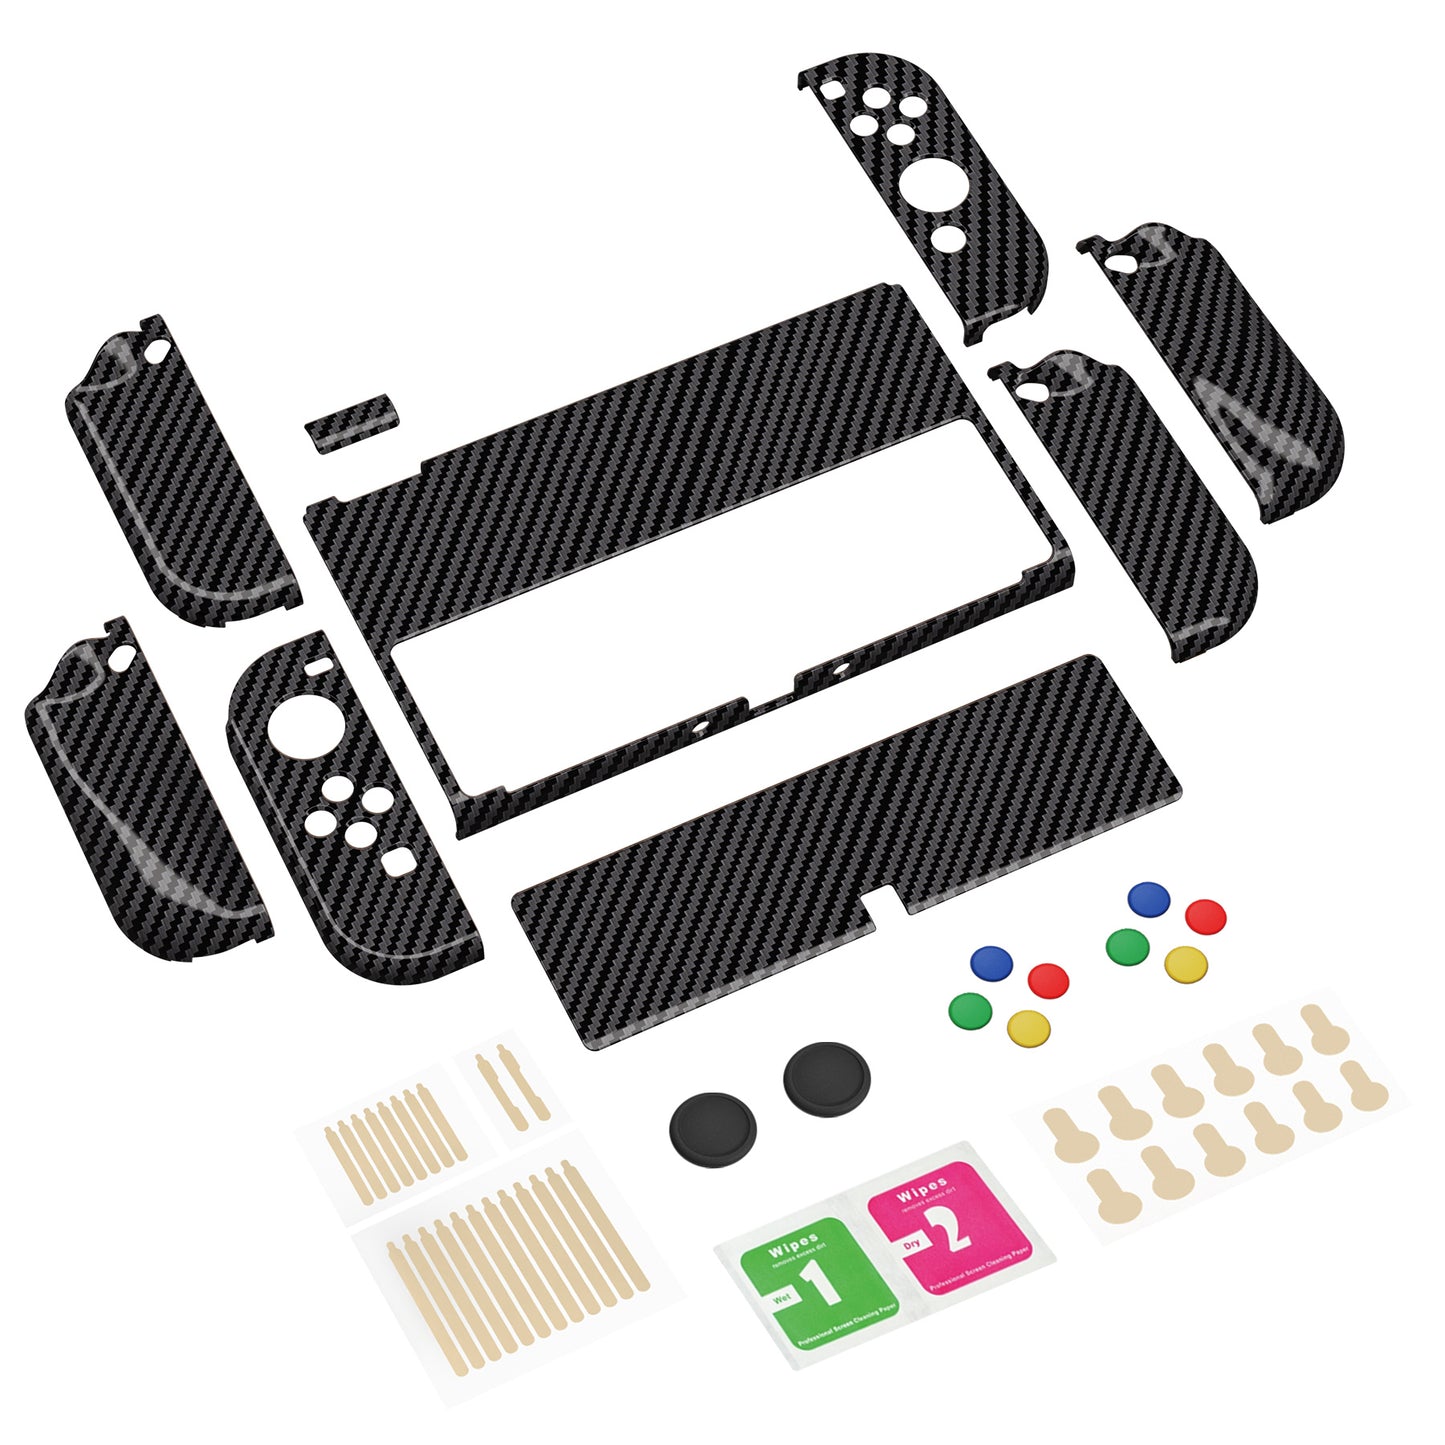 PlayVital AlterGrips Protective Slim Case for Nintendo Switch OLED, Ergonomic Grip Cover for Joycon, Dockable Hard Shell for Switch OLED with Thumb Grip Caps & Button Caps - Graphite Carbon Fiber - JSOYS2002 playvital